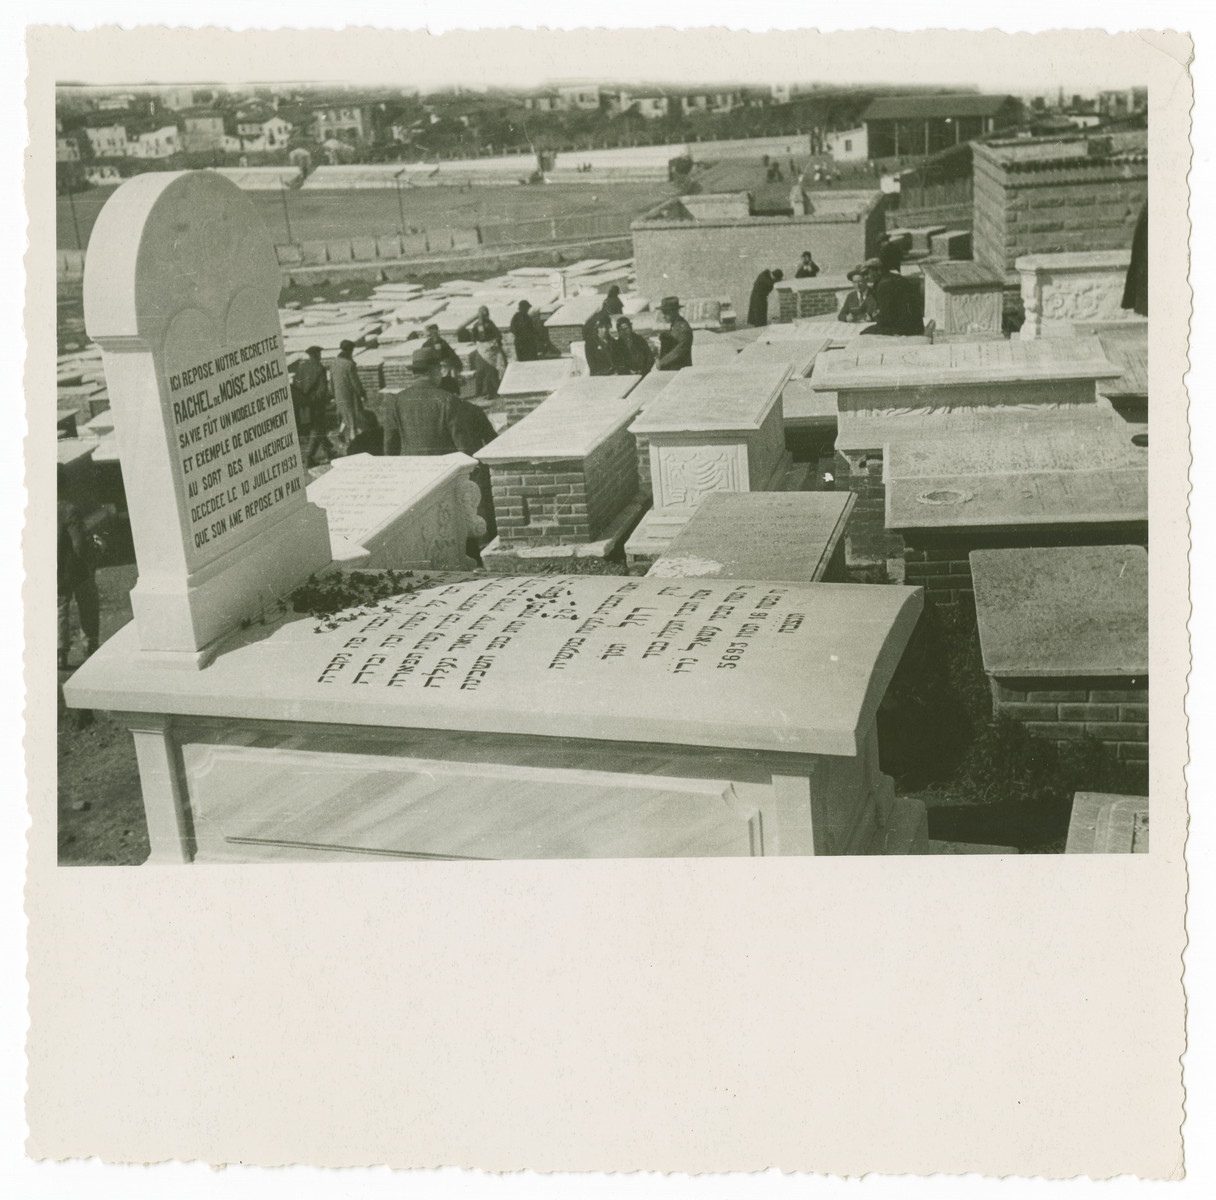 View of the Jewish cemetery in Salonika before the war.